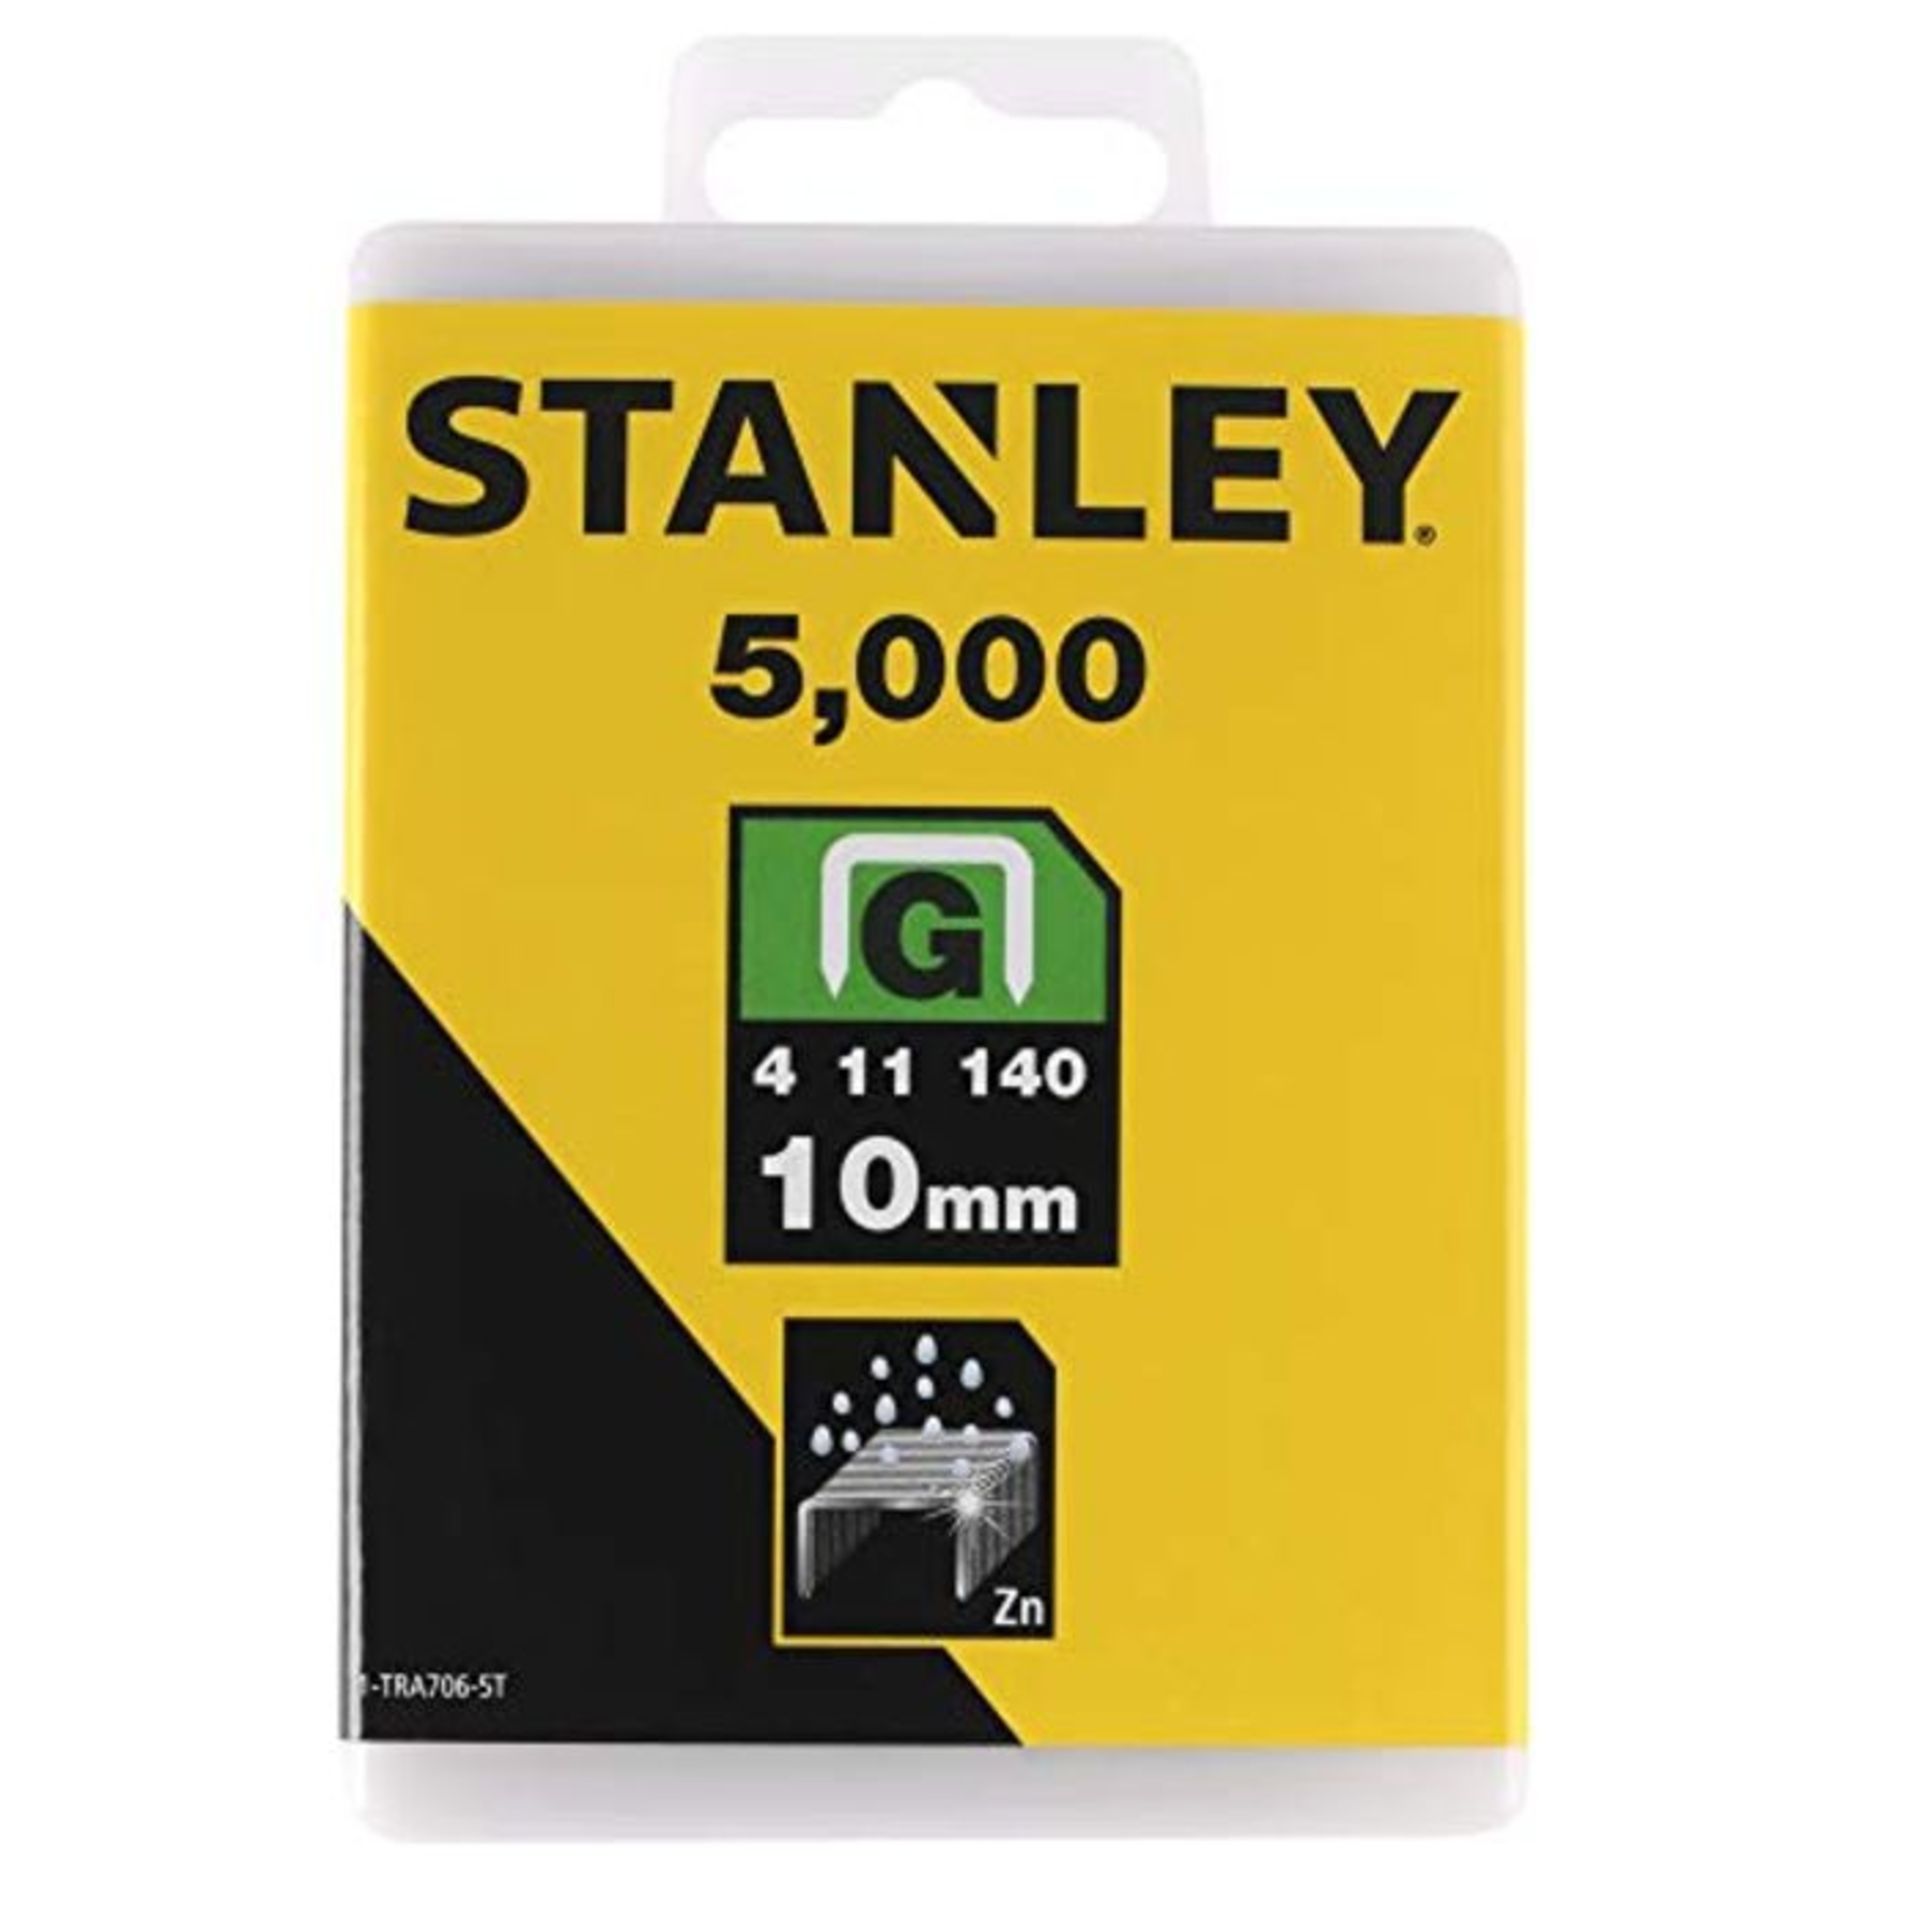 STANLEY Heavy Duty Cable Staples SharpShooter Pack of 5000 Type G 10 mm Resistant and